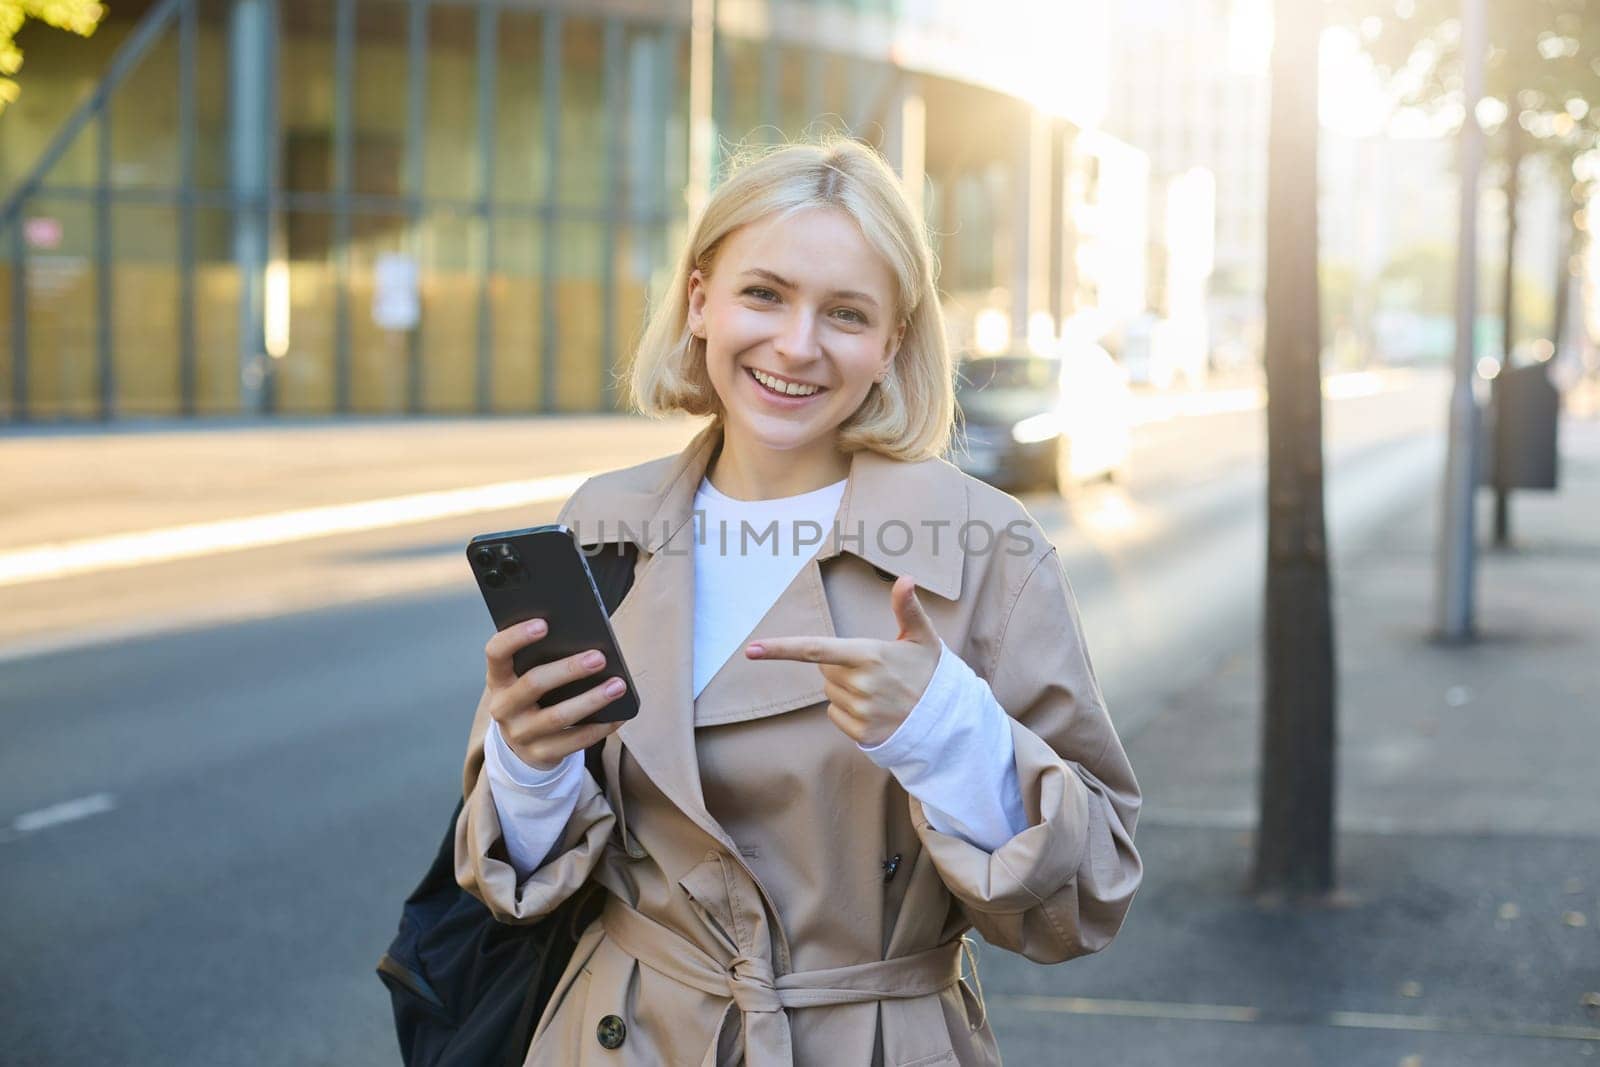 Portrait of young woman on streets of city, holding smartphone, pointing at her mobile phone, looking happy and smiling at camera.